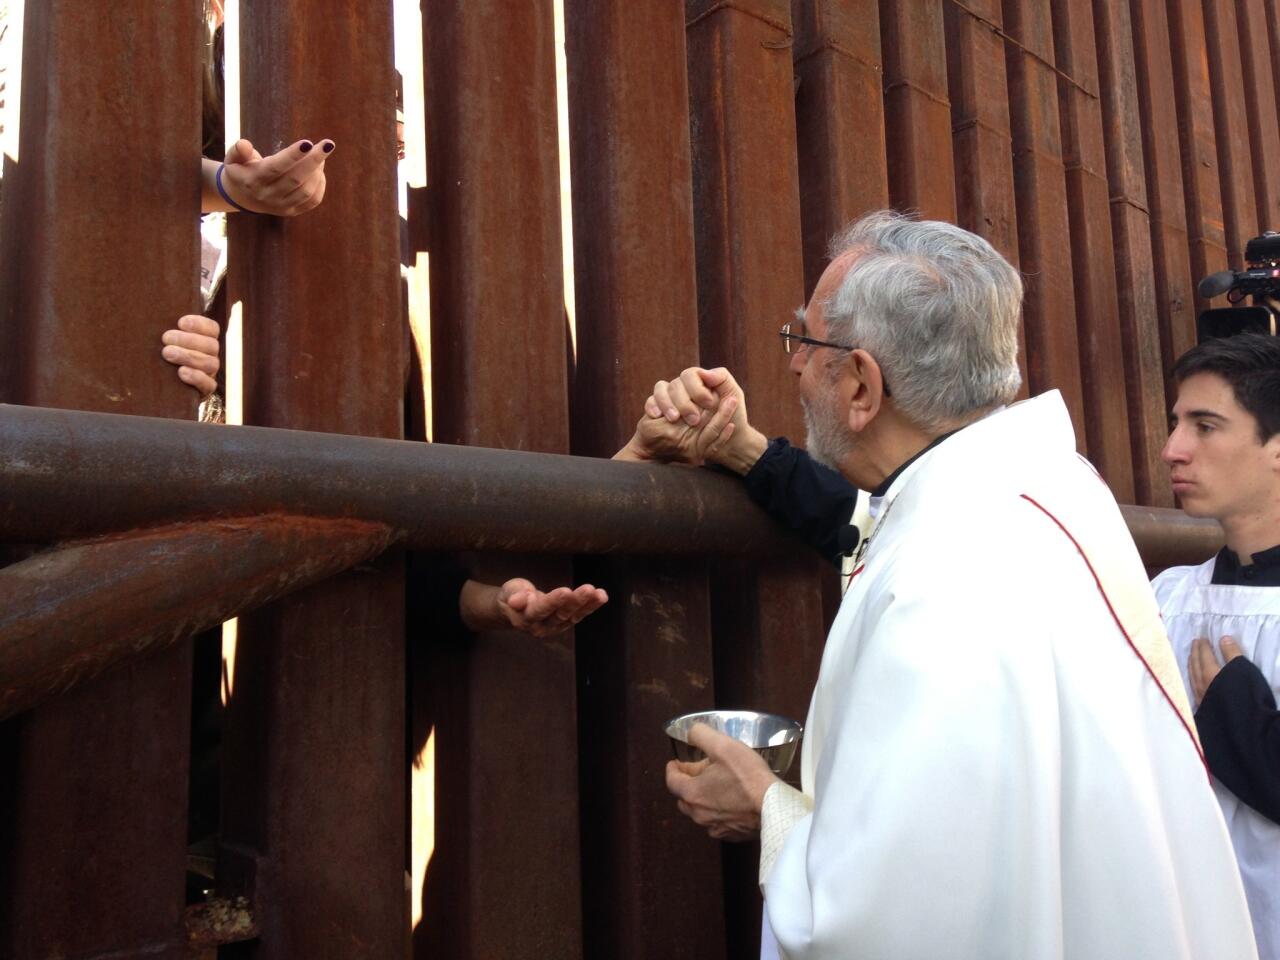 Tucson Bishop Gerald Kicanas gives Communion to people on the Mexican side of the border fence.